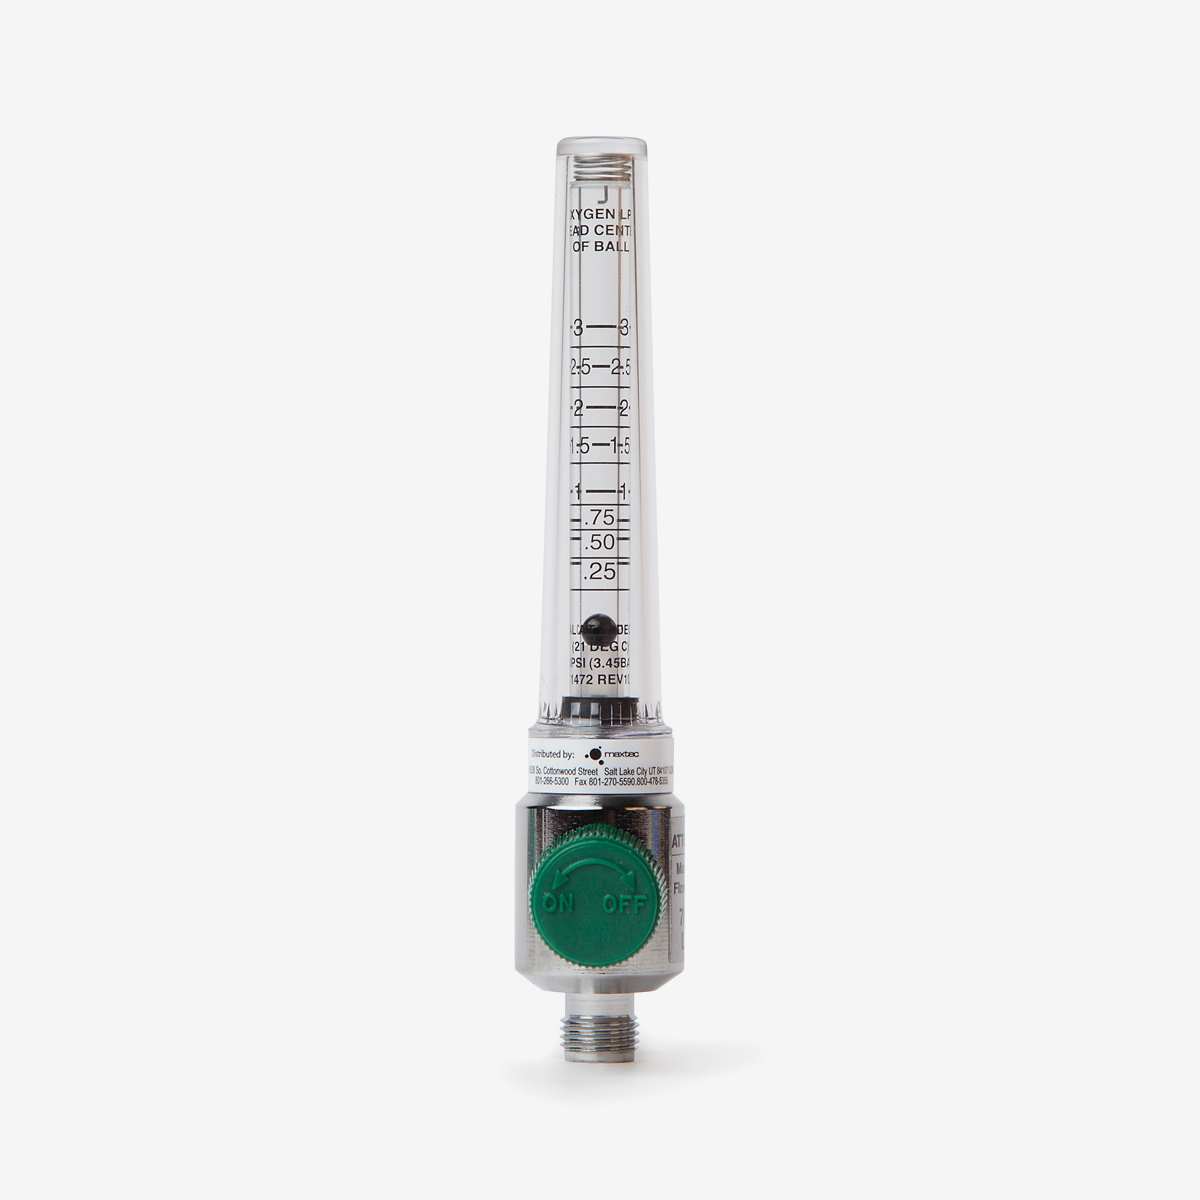 0-3 liters per minute flow meter with green knob on white background